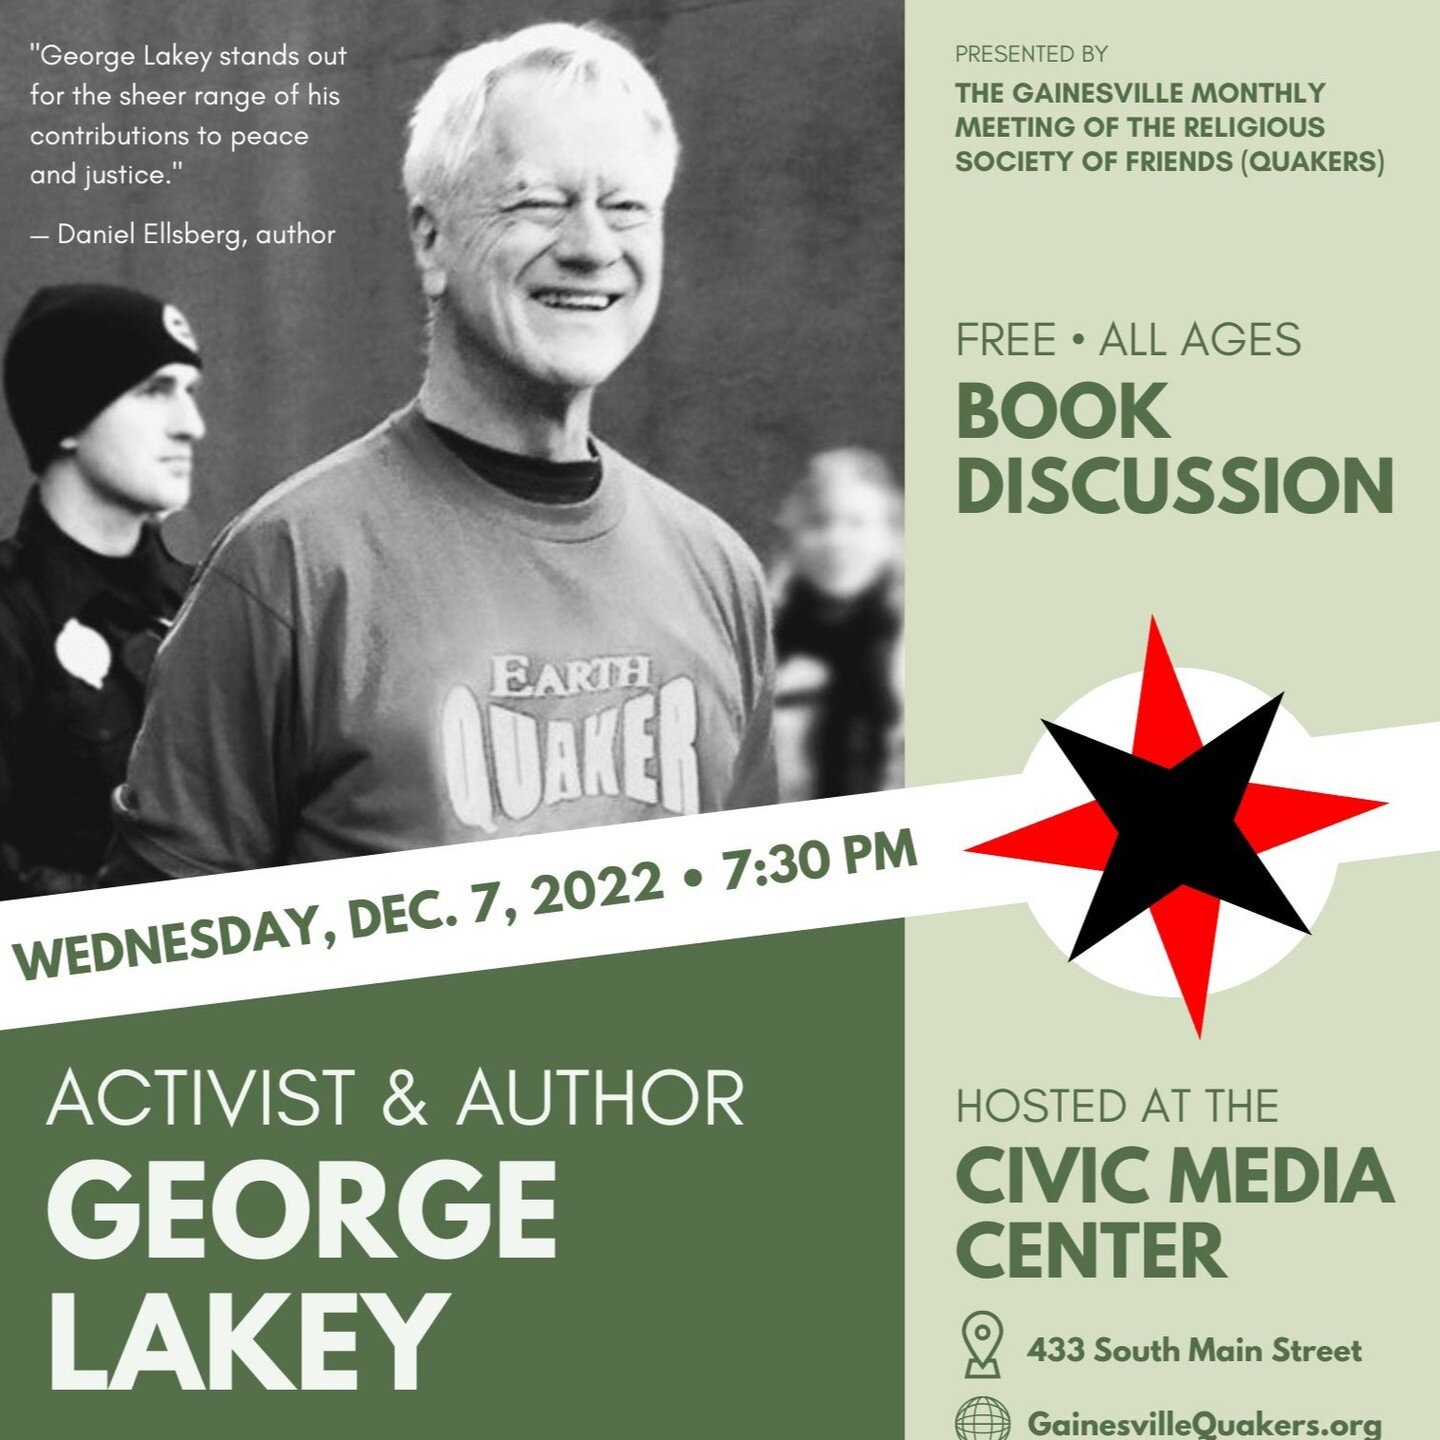 George Lakey, a remarkable organizer, activist, author, and university professor, will speak at the CMC at 7:30 p.m. on Wednesday, Dec. 7. 

Lakey was a leader in the Civil Rights movement in the 1970s and continues to inspire and lead on issues incl